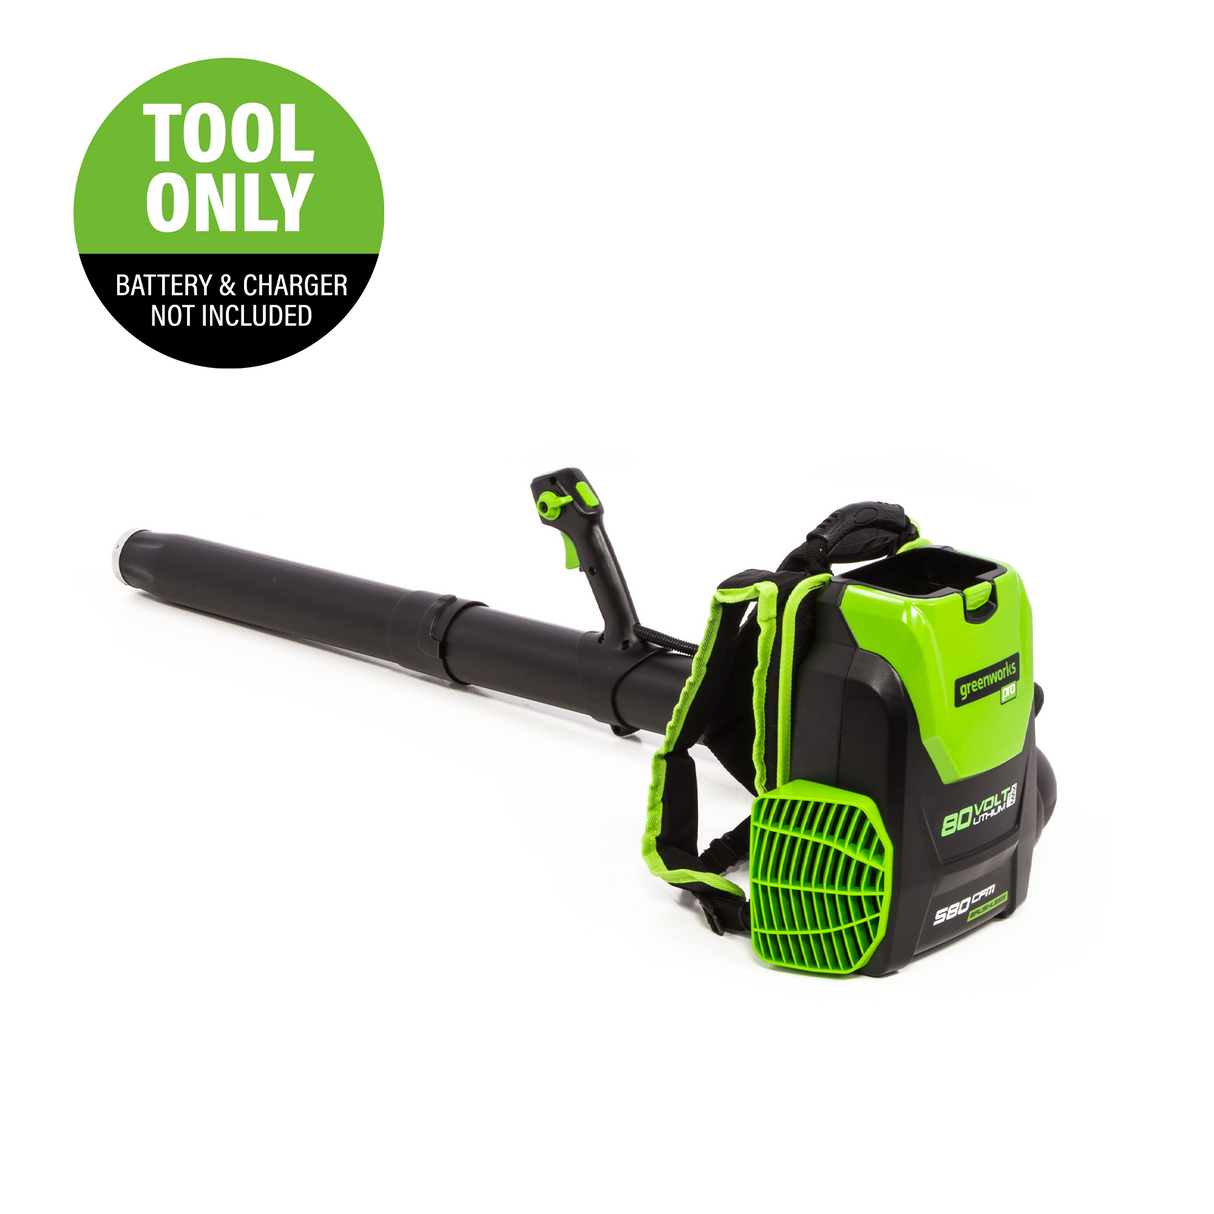 80V 180 MPH - 610 CFM Brushless Backpack Blower (Tool Only) - BPB80L00 (Costco Exclusive)